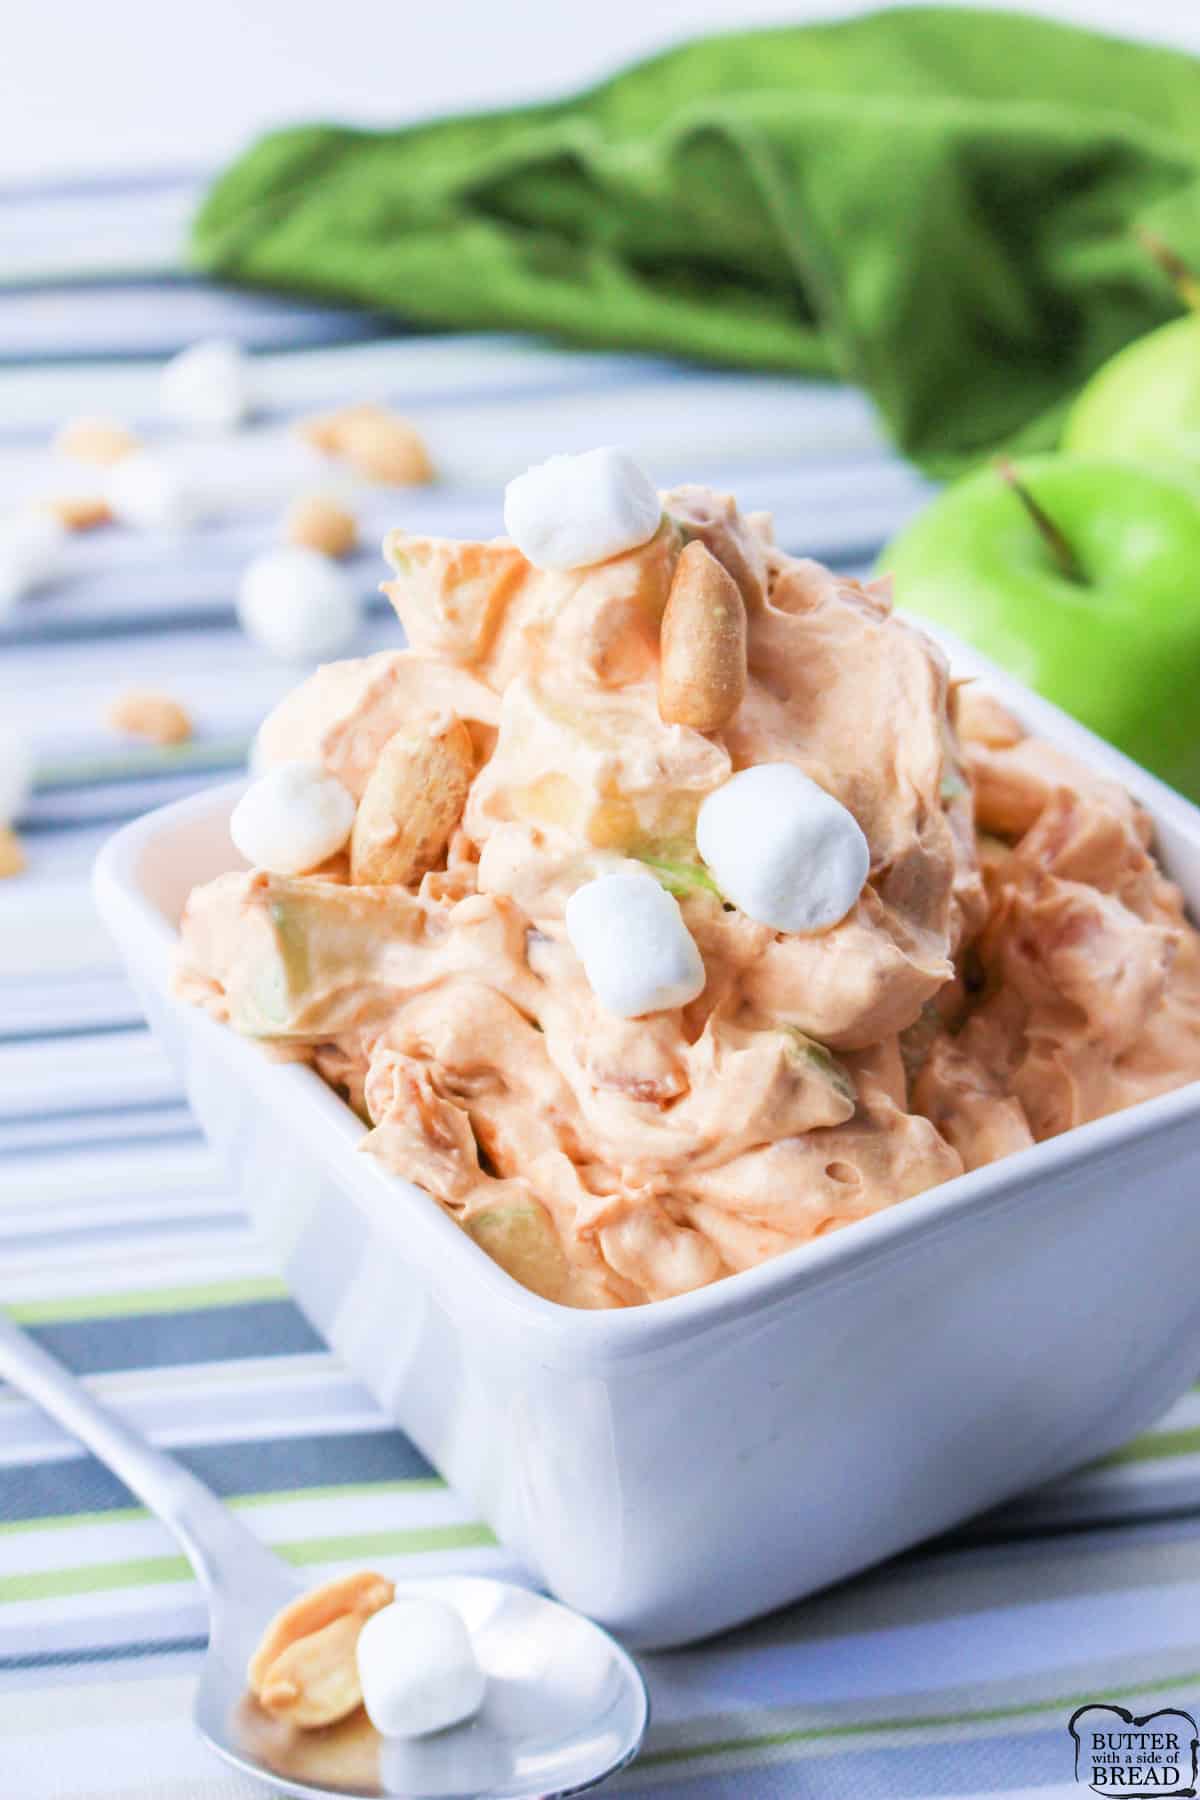 Caramel Apple Fluff made in minutes with only 6 ingredients. Simple fluff recipe that tastes like caramel apples!